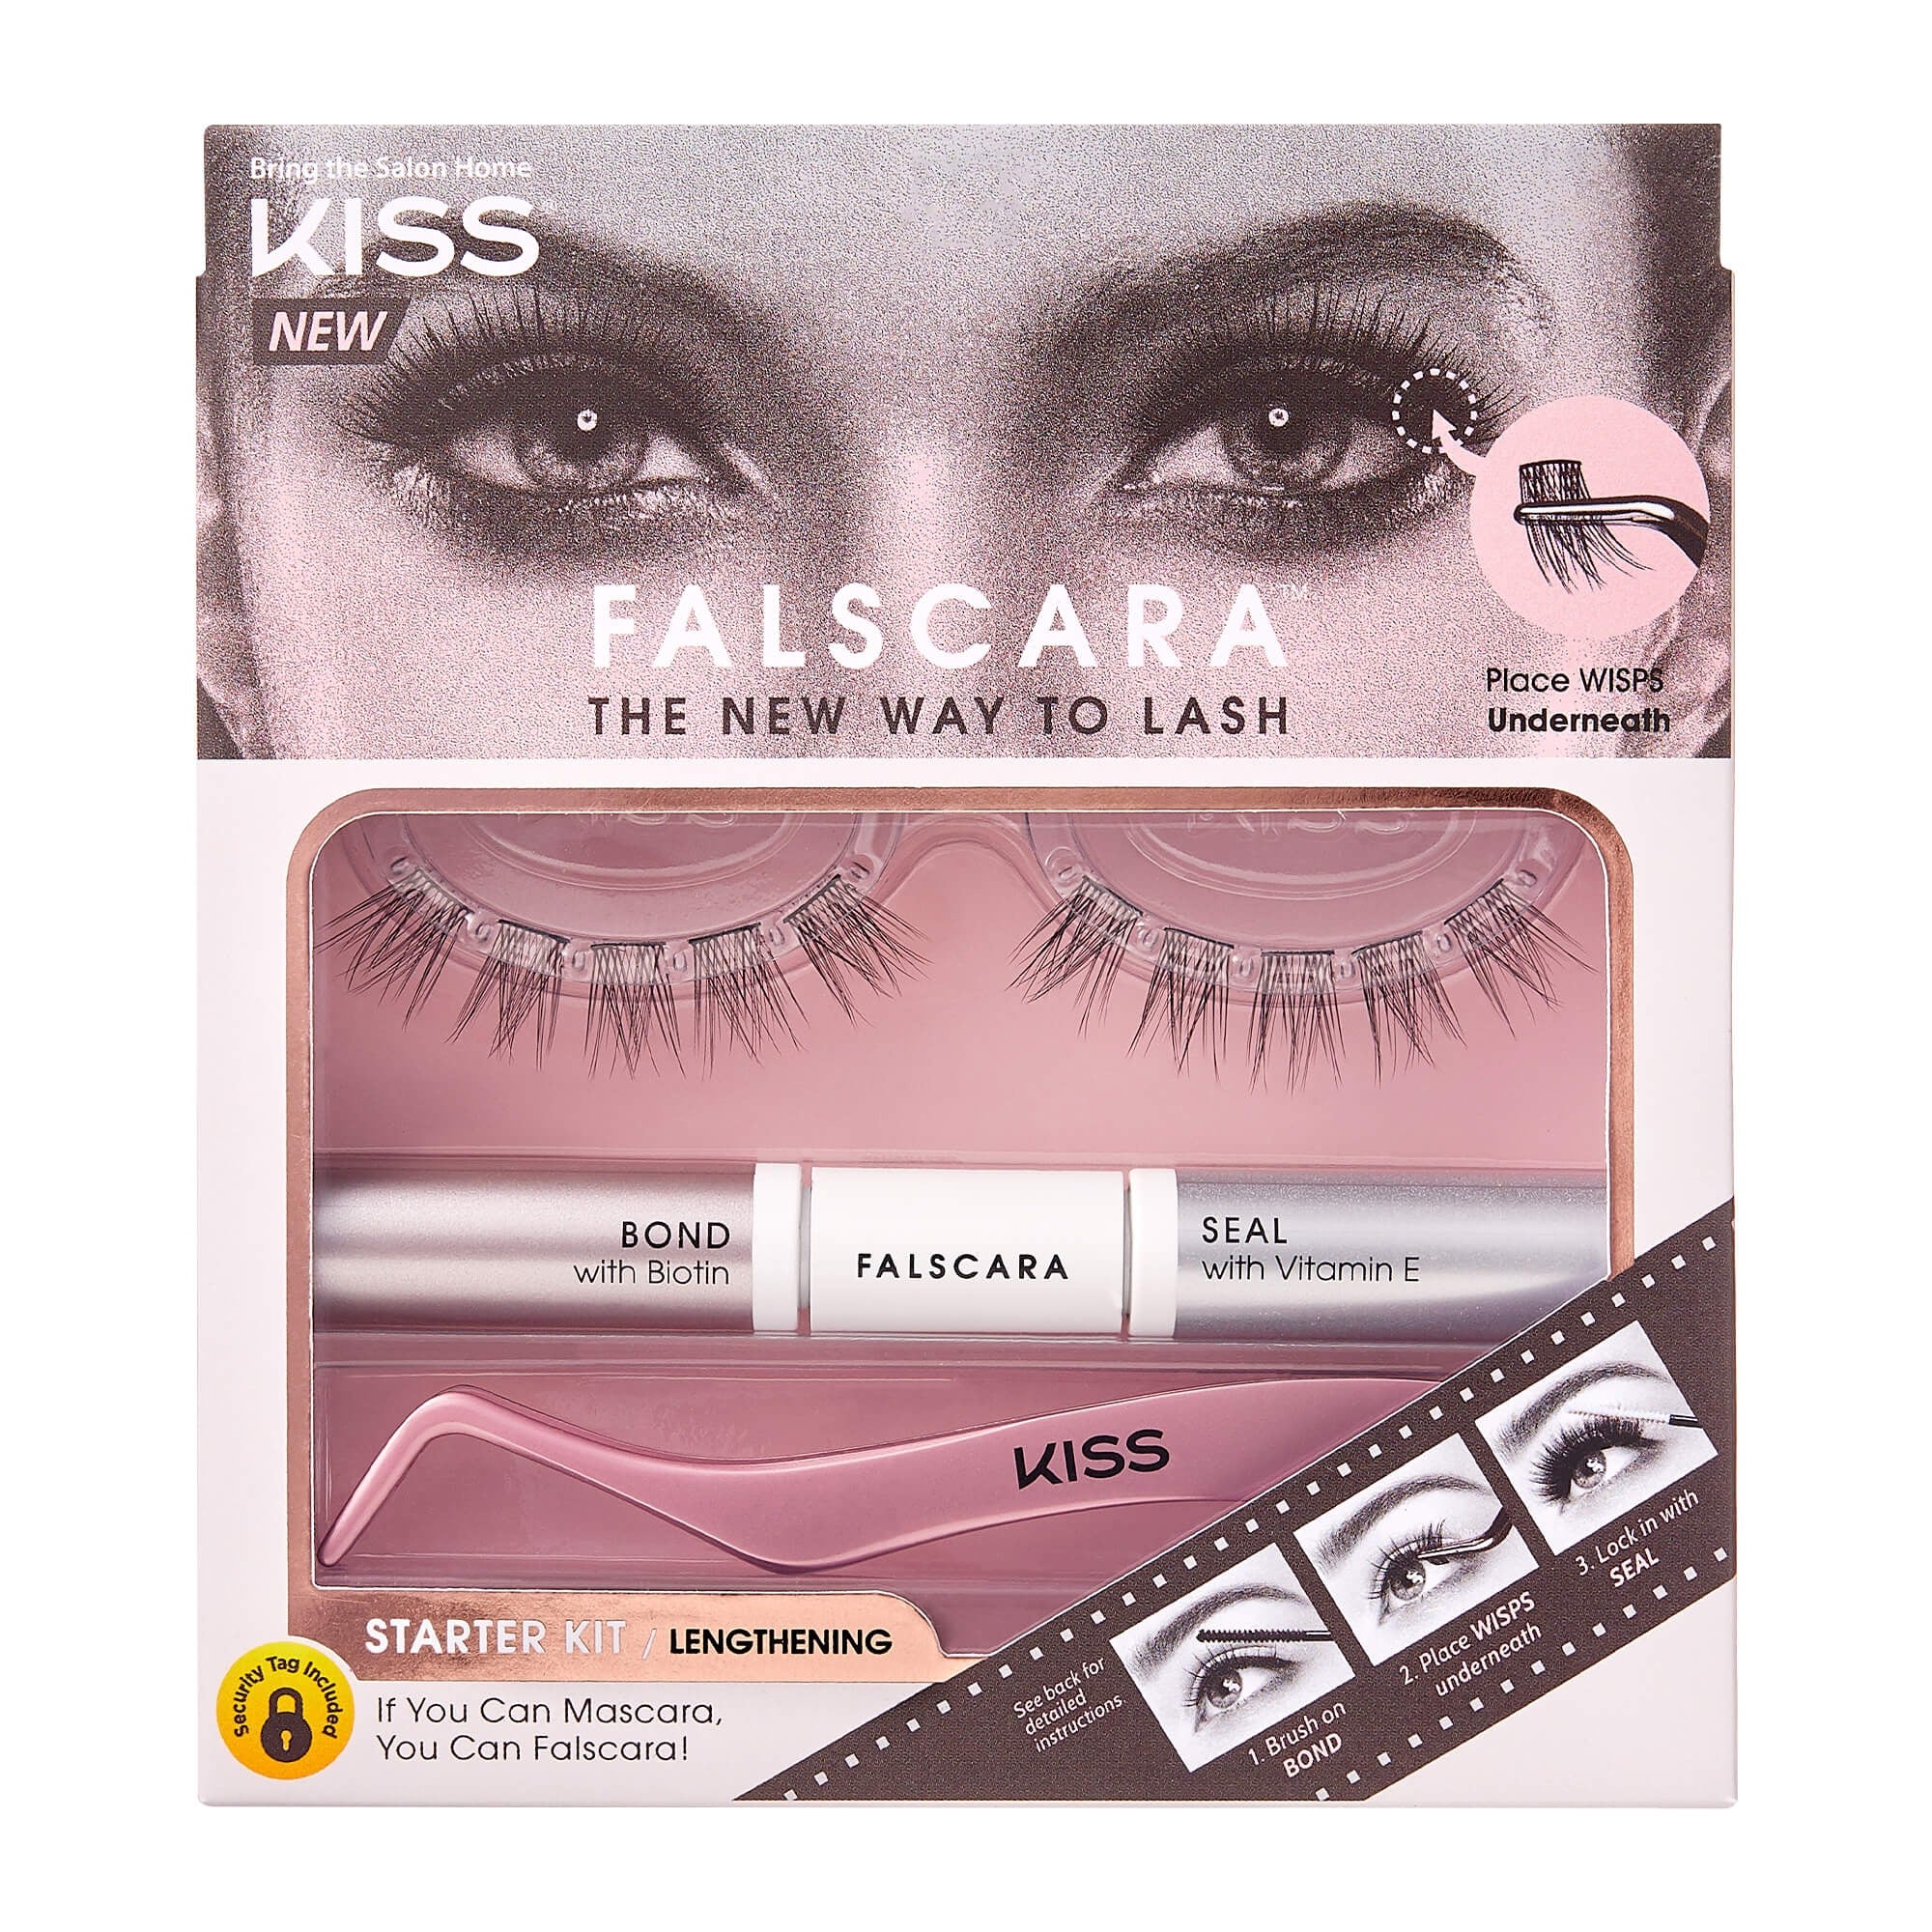 These Are The Easiest False Lashes I’ve Ever Applied